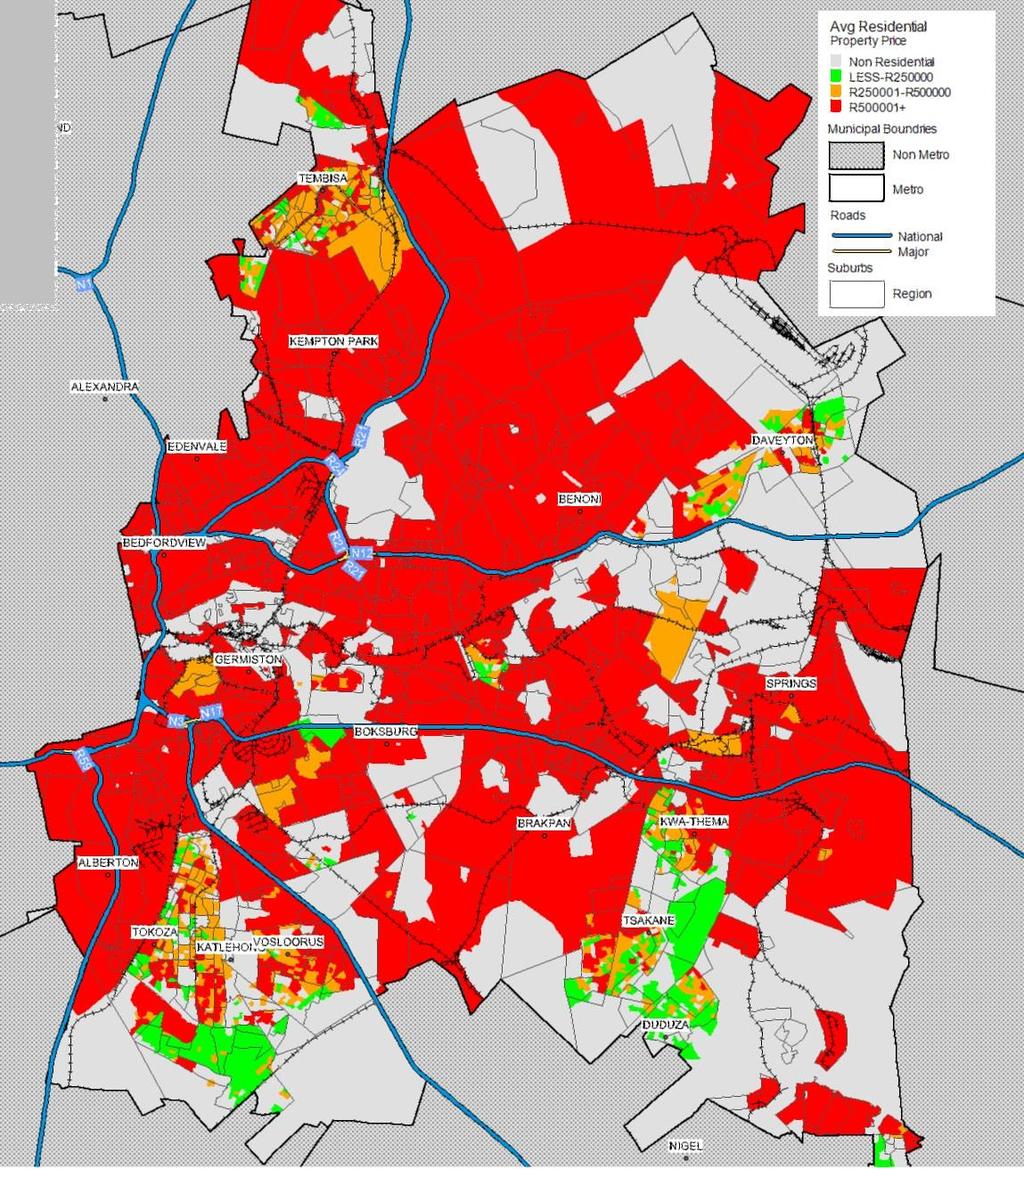 Location of affordable suburbs 14 Ekurhuleni s current affordable suburbs reflect its industrial legacy, but are ill-placed for affordable, efficient housing opportunities The map reflects the